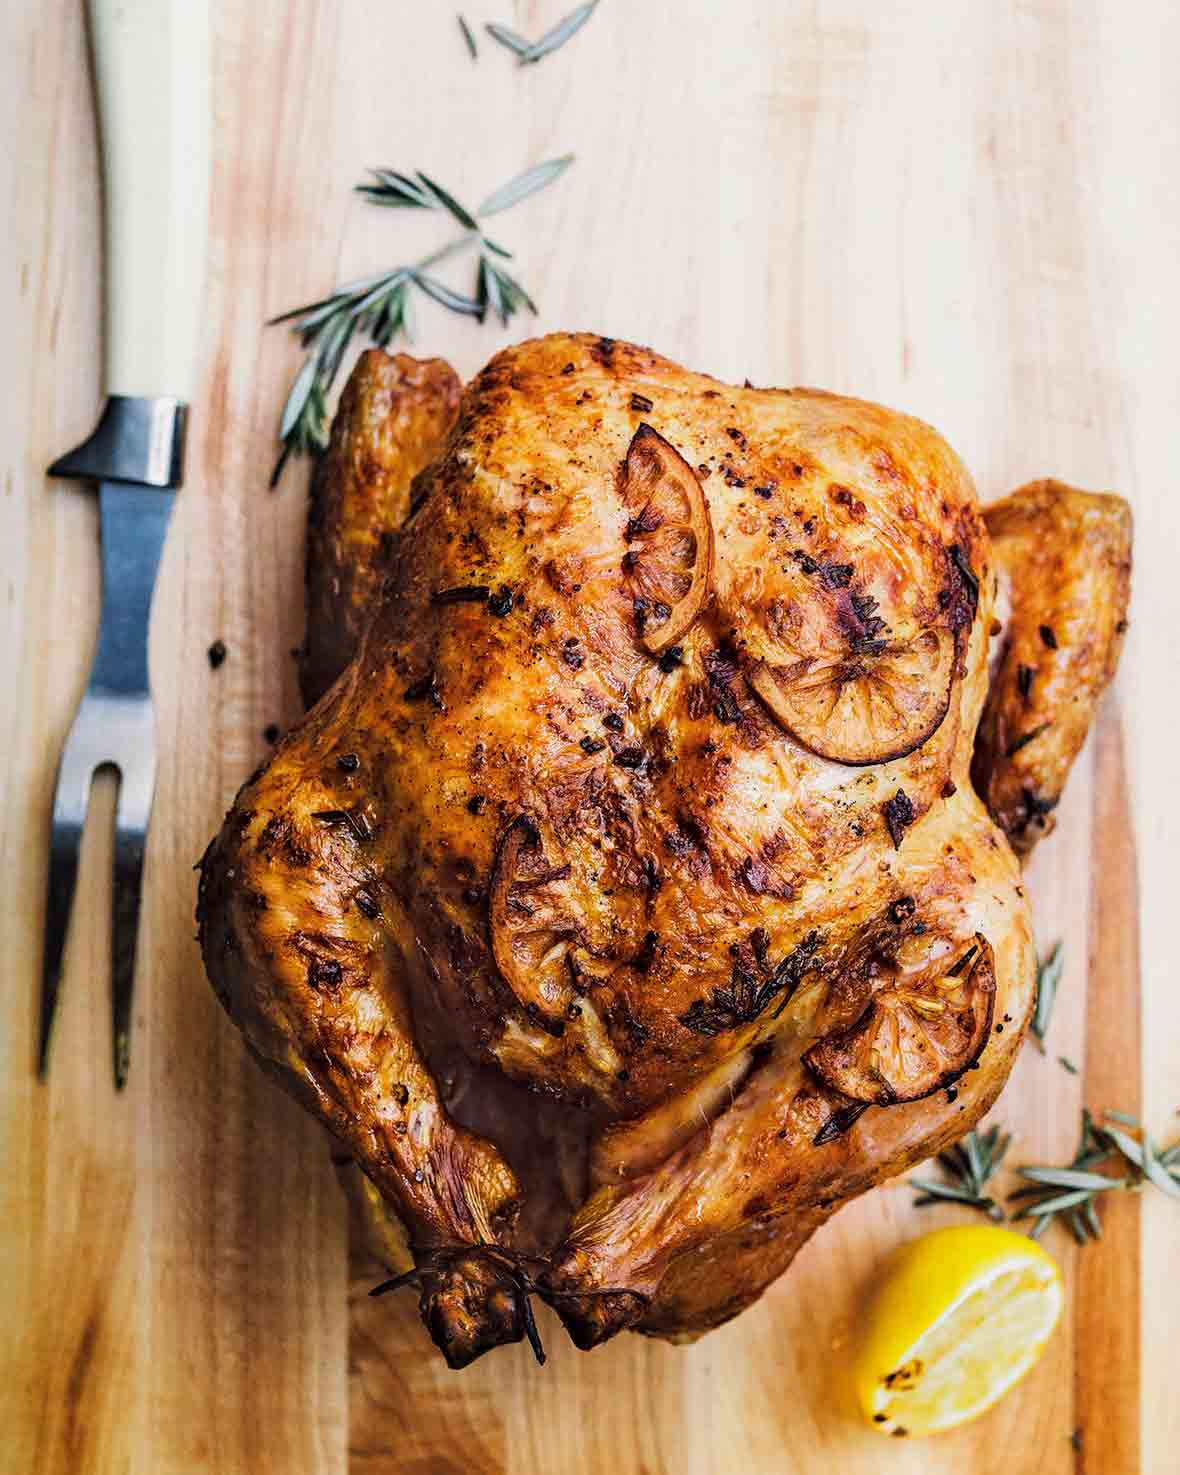 Grilled Whole Chicken Recipes
 Whole Grilled Chicken Recipe